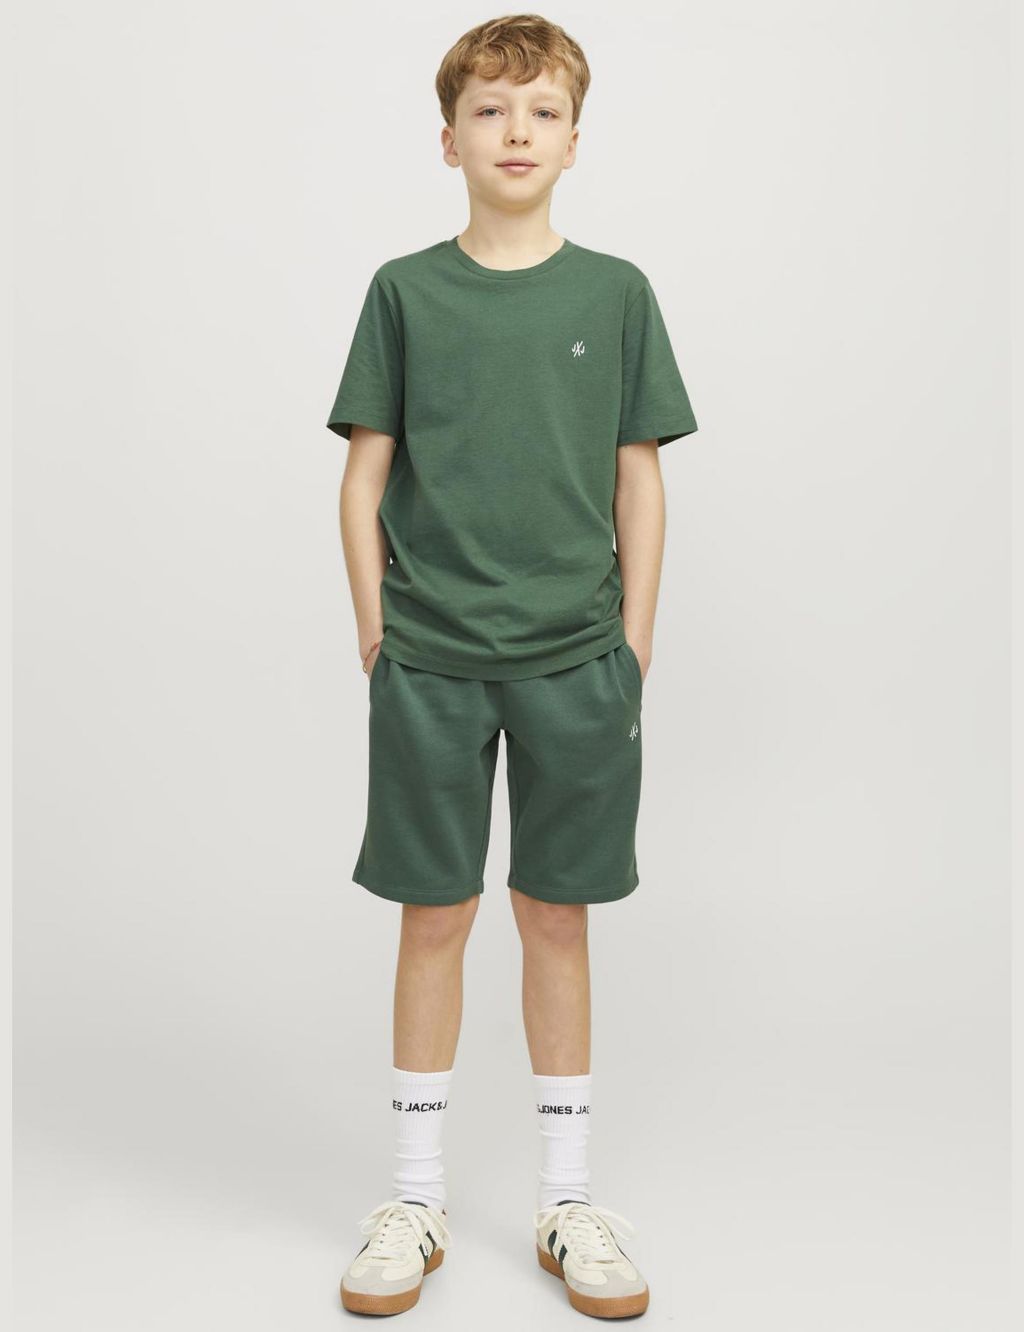 2pc Pure Cotton Top & Bottom Outfit (8-16 Yrs)